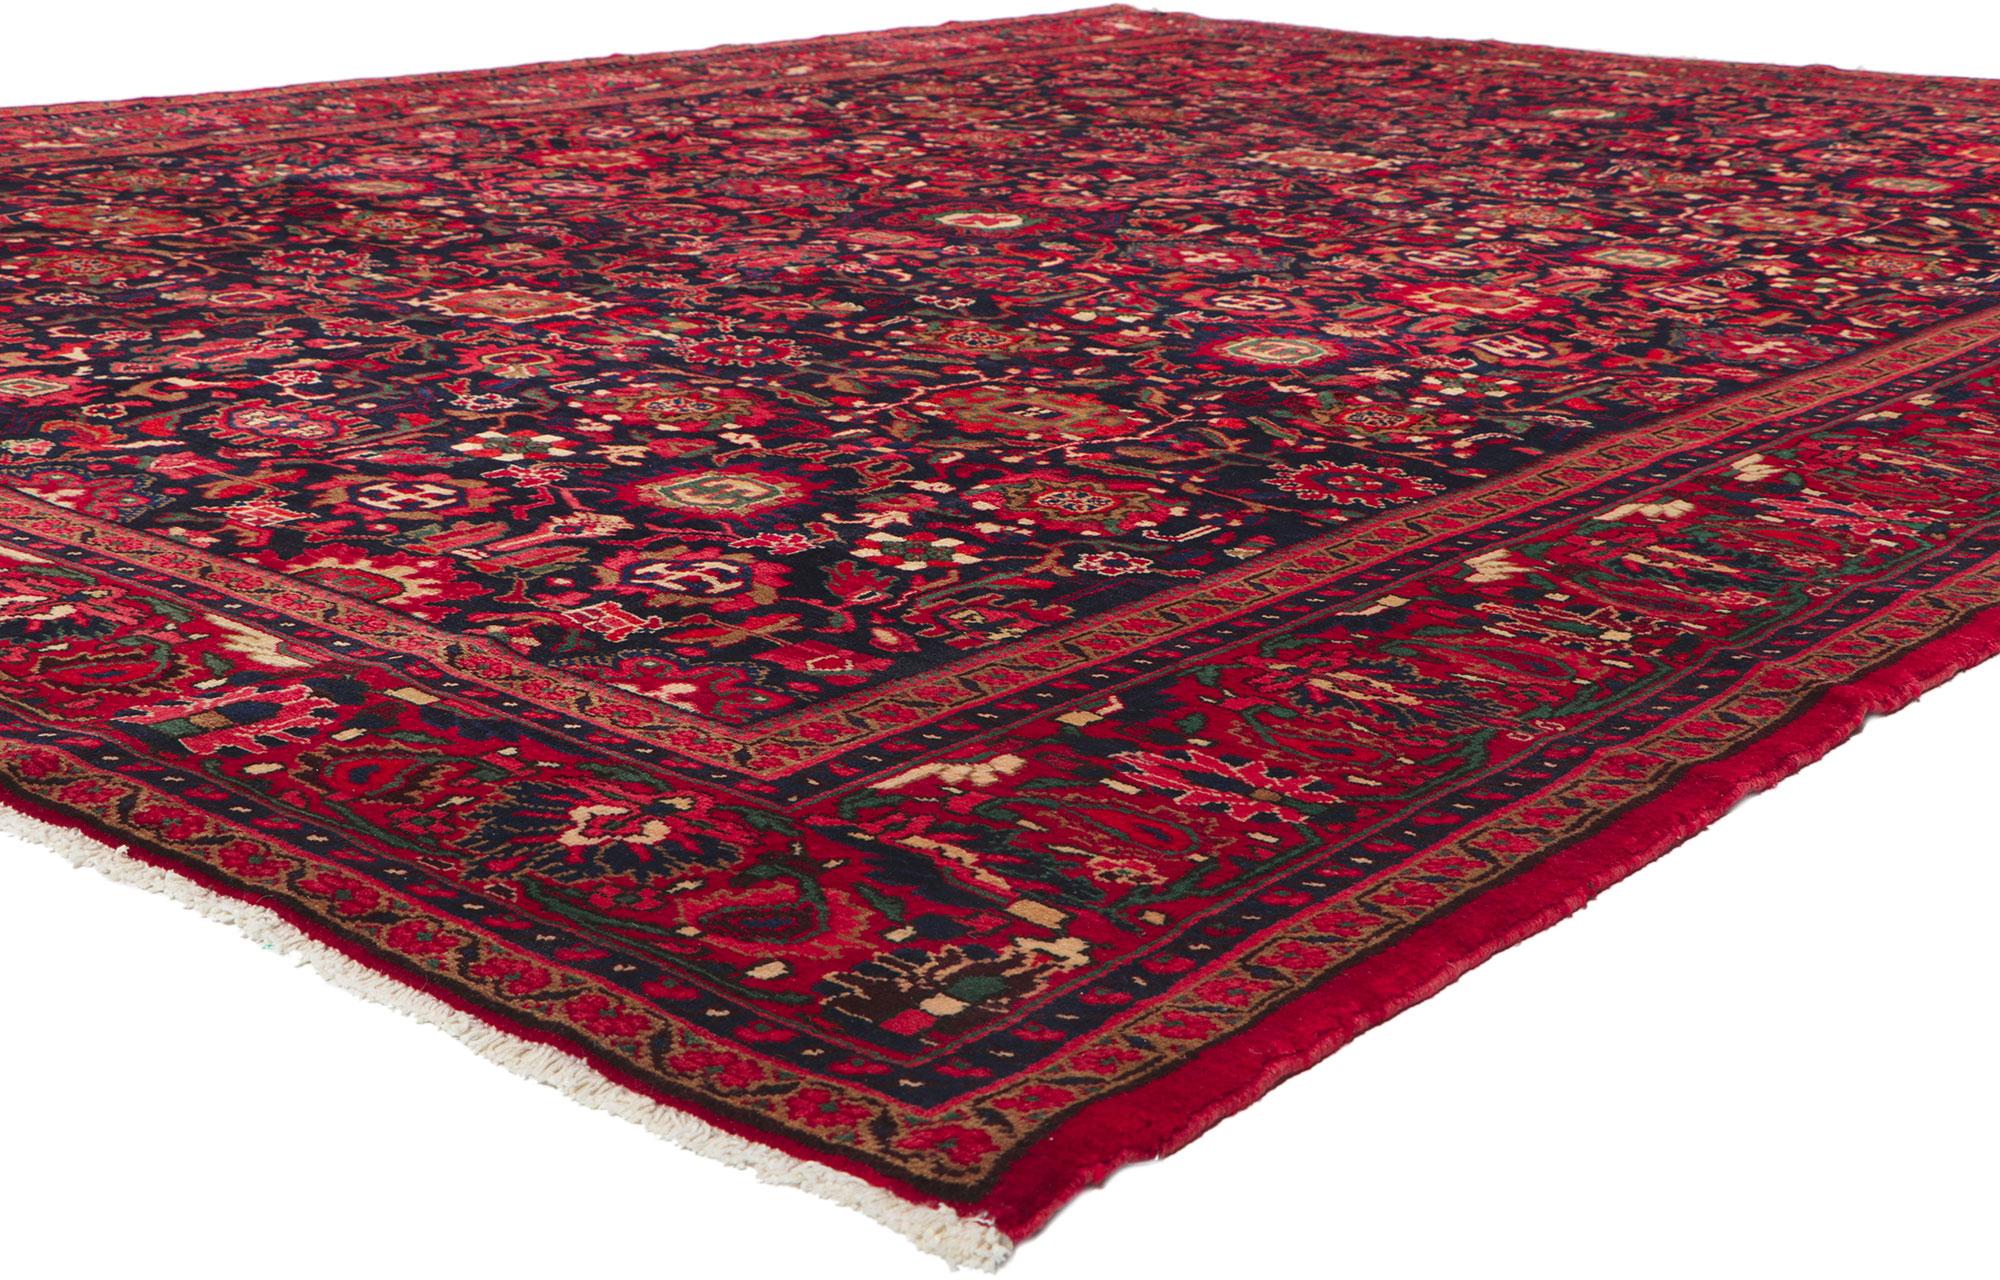 61145 Vintage Persian Malayer Rug, 10'06 x 13'09. ?Emanating a timeless design and beguiling beauty in saturated colors, this hand-knotted wool vintage Persian Malayer rug is poised to impress. An allover repeating botanical pattern spread across